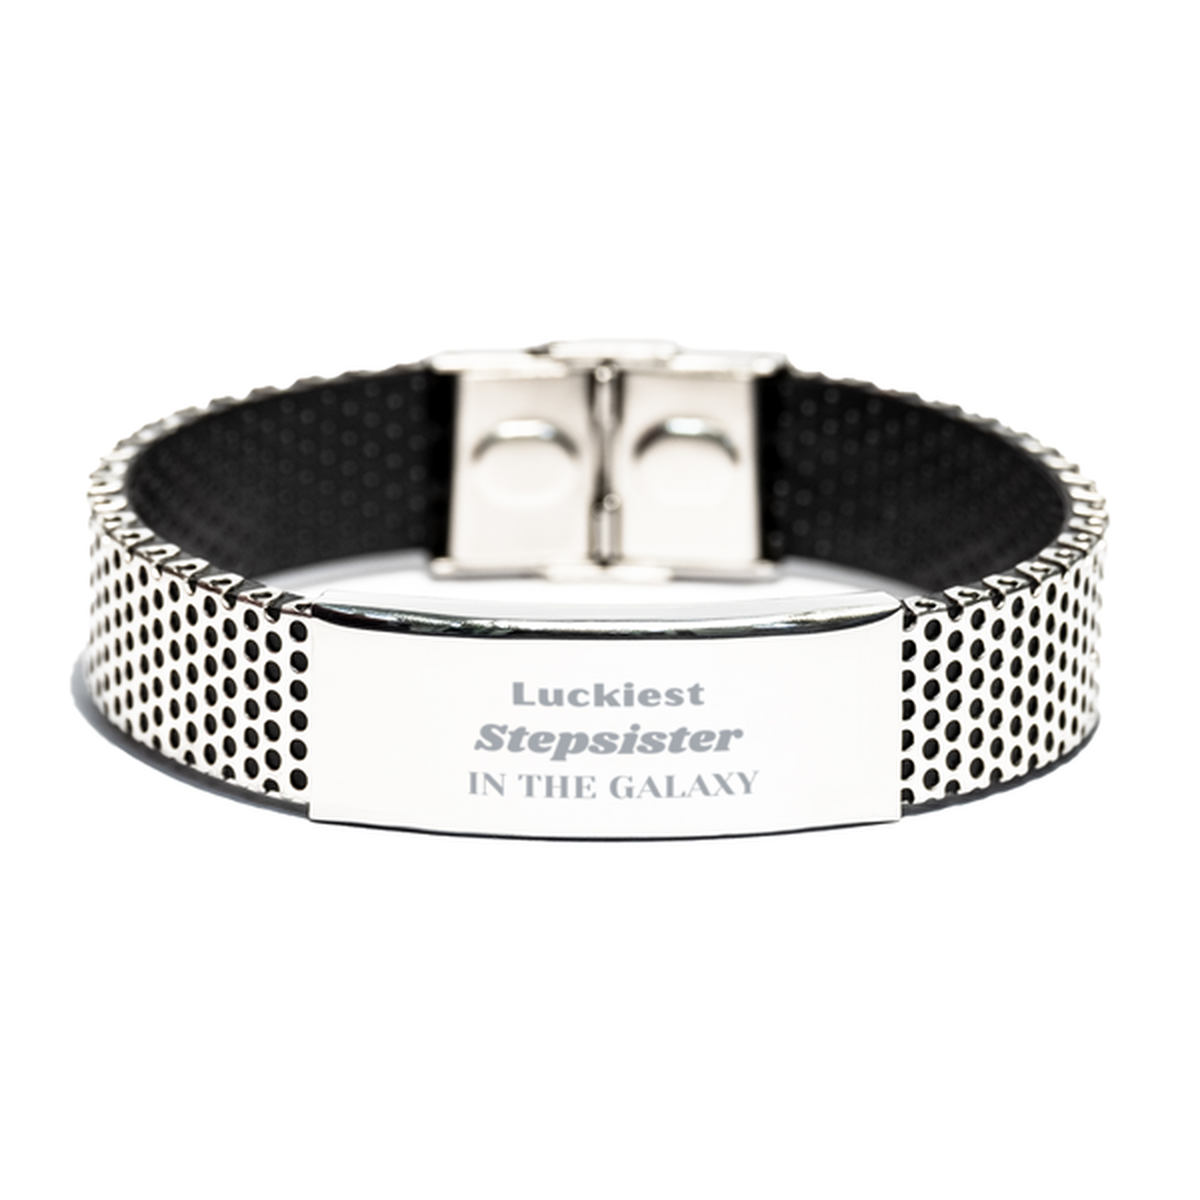 Luckiest Stepsister in the Galaxy, To My Stepsister Engraved Gifts, Christmas Stepsister Stainless Steel Bracelet Gifts, X-mas Birthday Unique Gifts For Stepsister Men Women